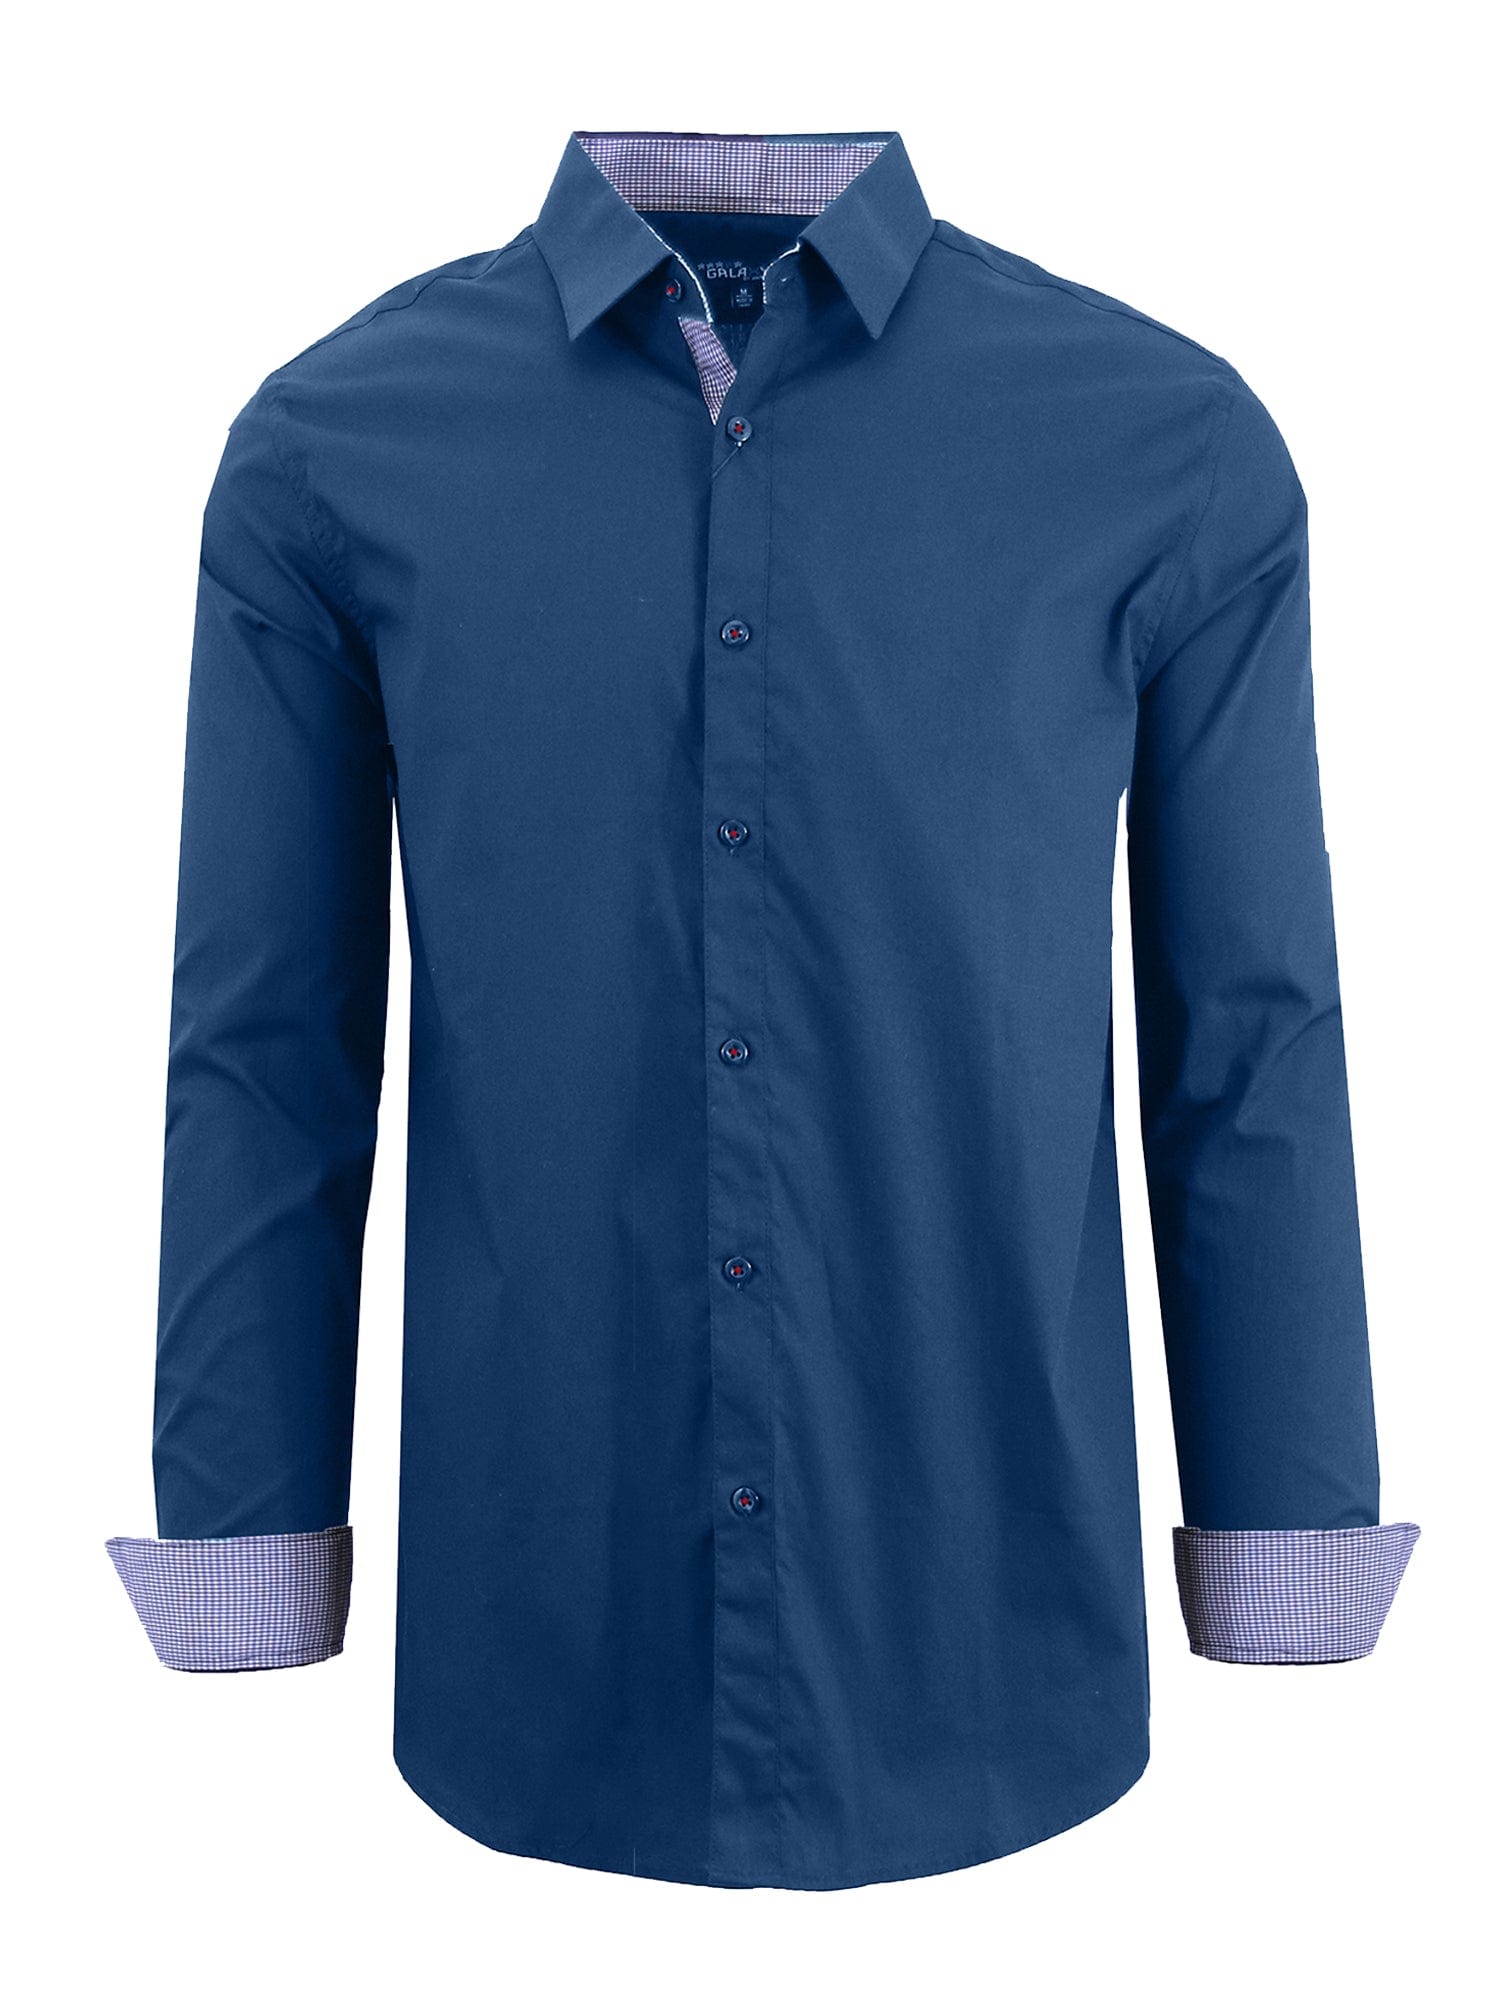 Men's Long-Sleeve Solid Slim-Fit Casual Dress Shirts